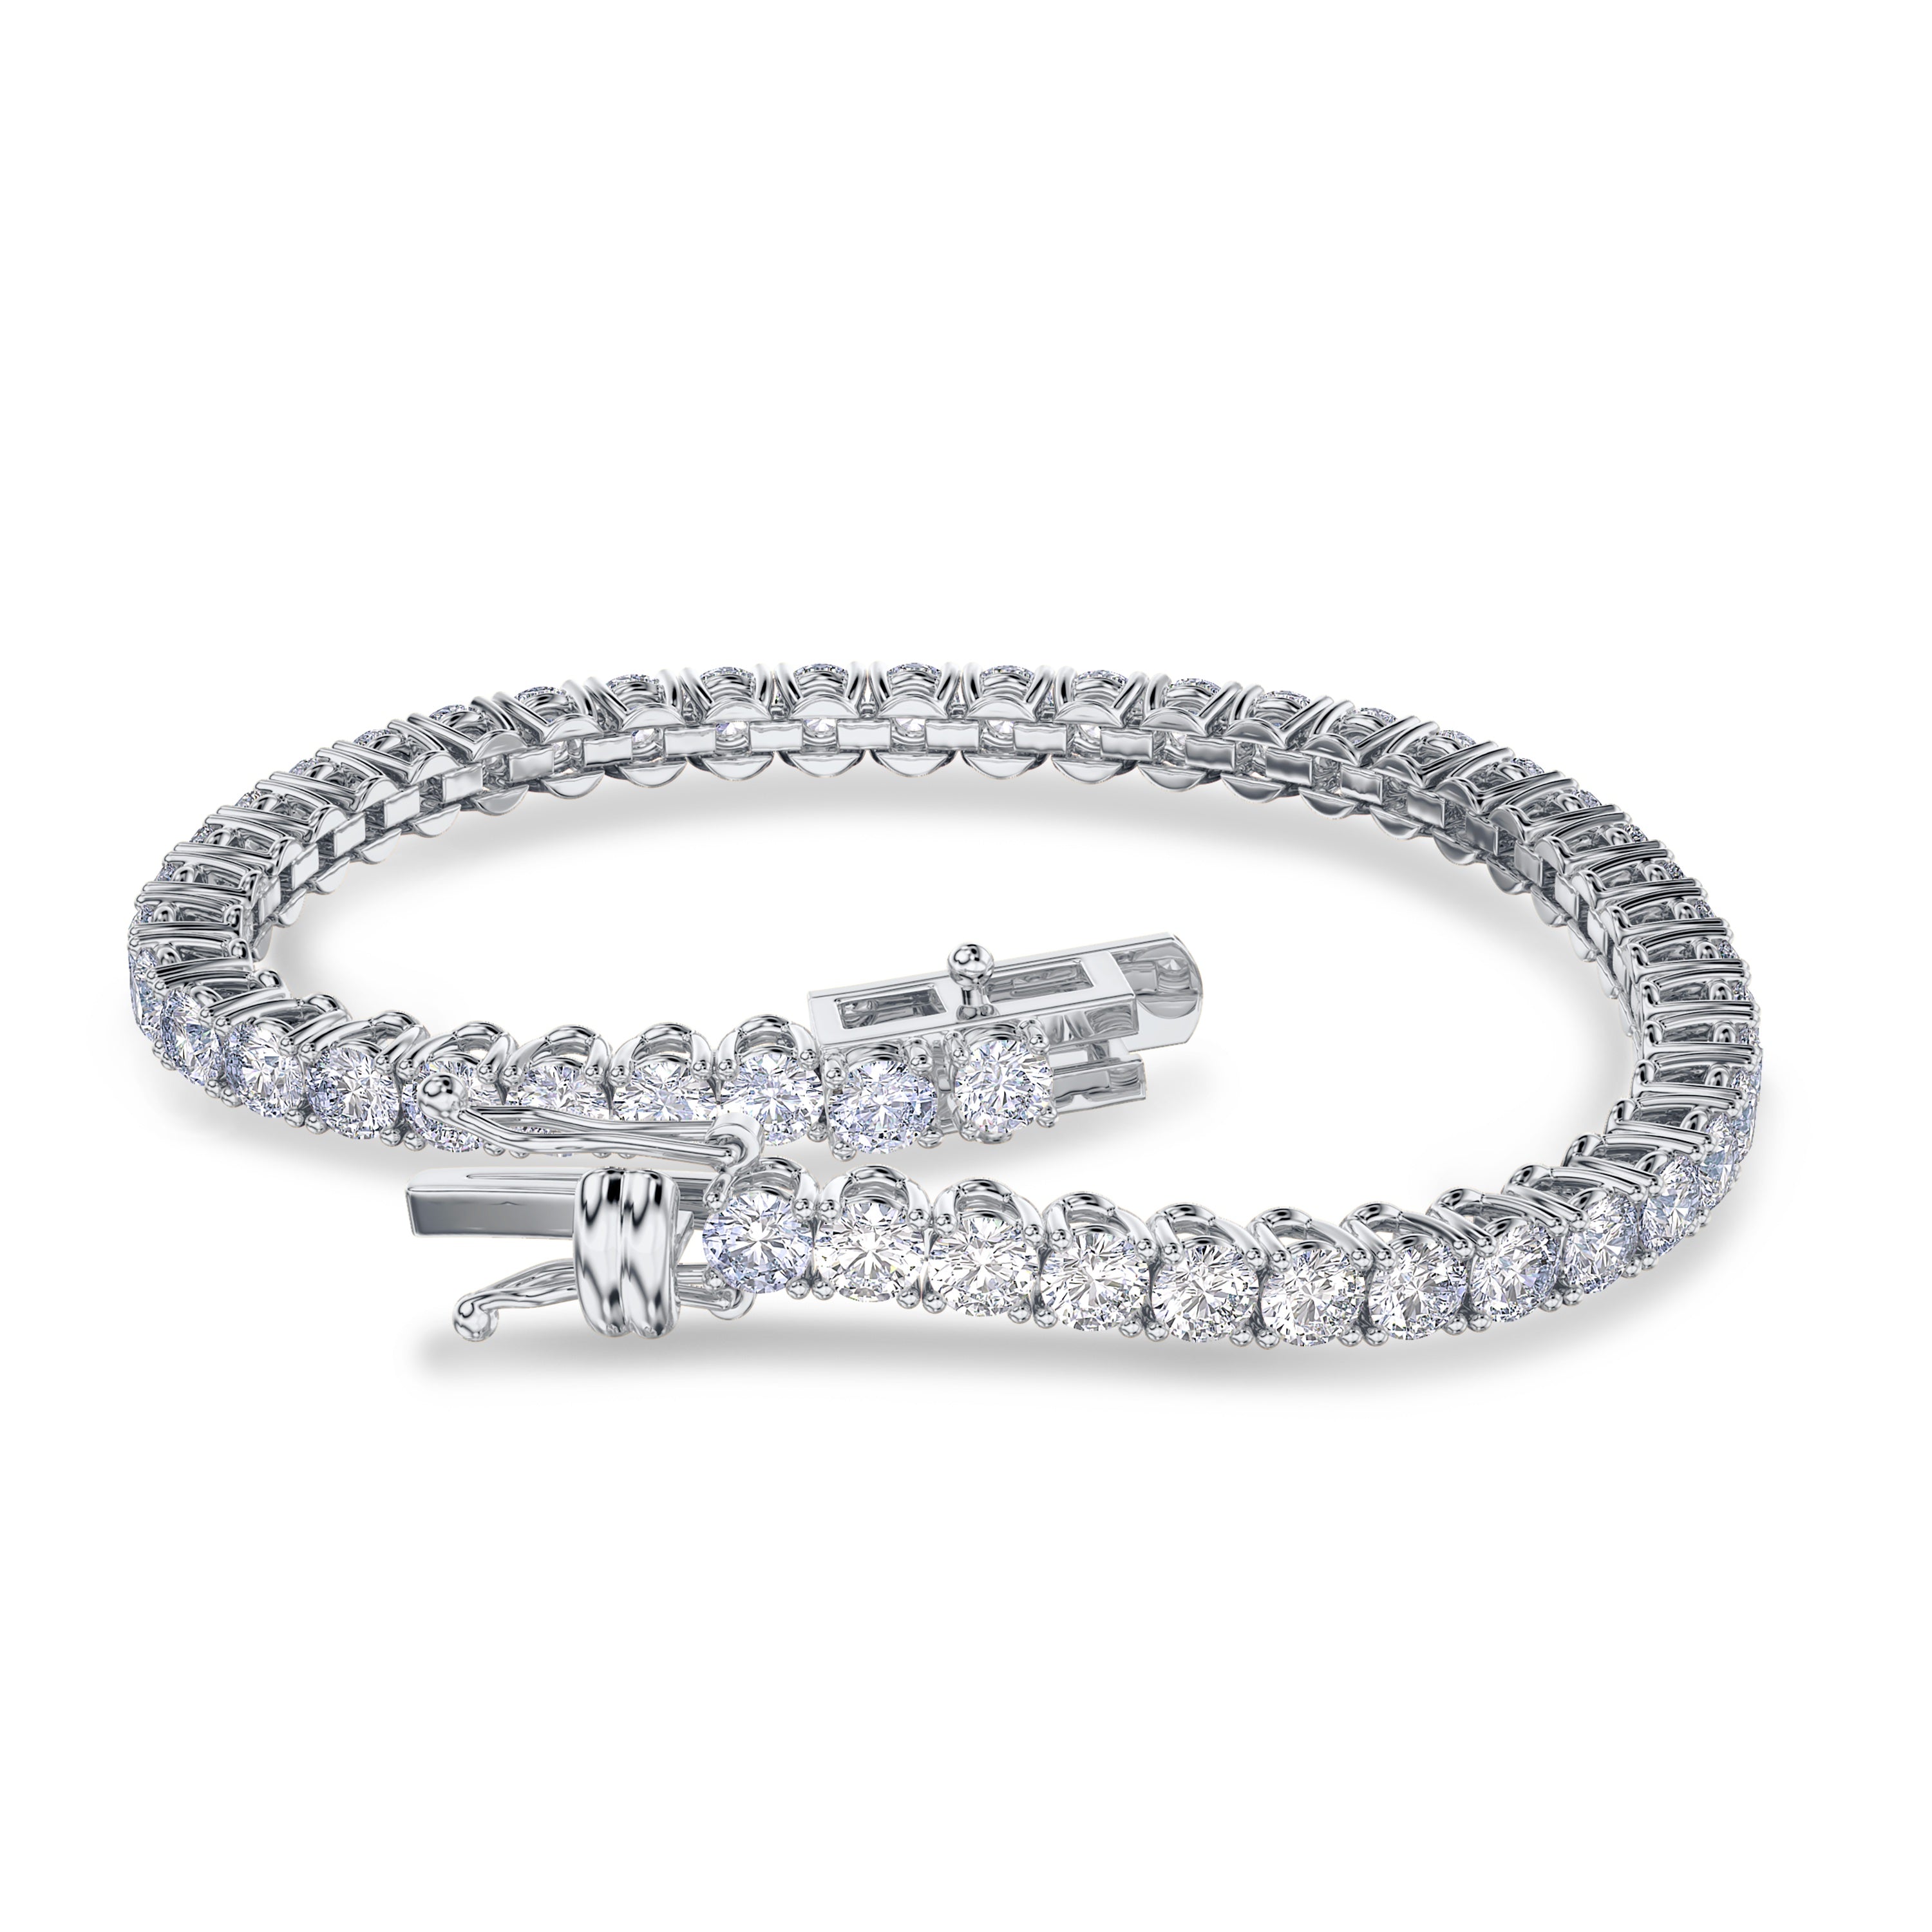 10.32 carat tennis bracelet in 18k gold, FG color and SI clarity